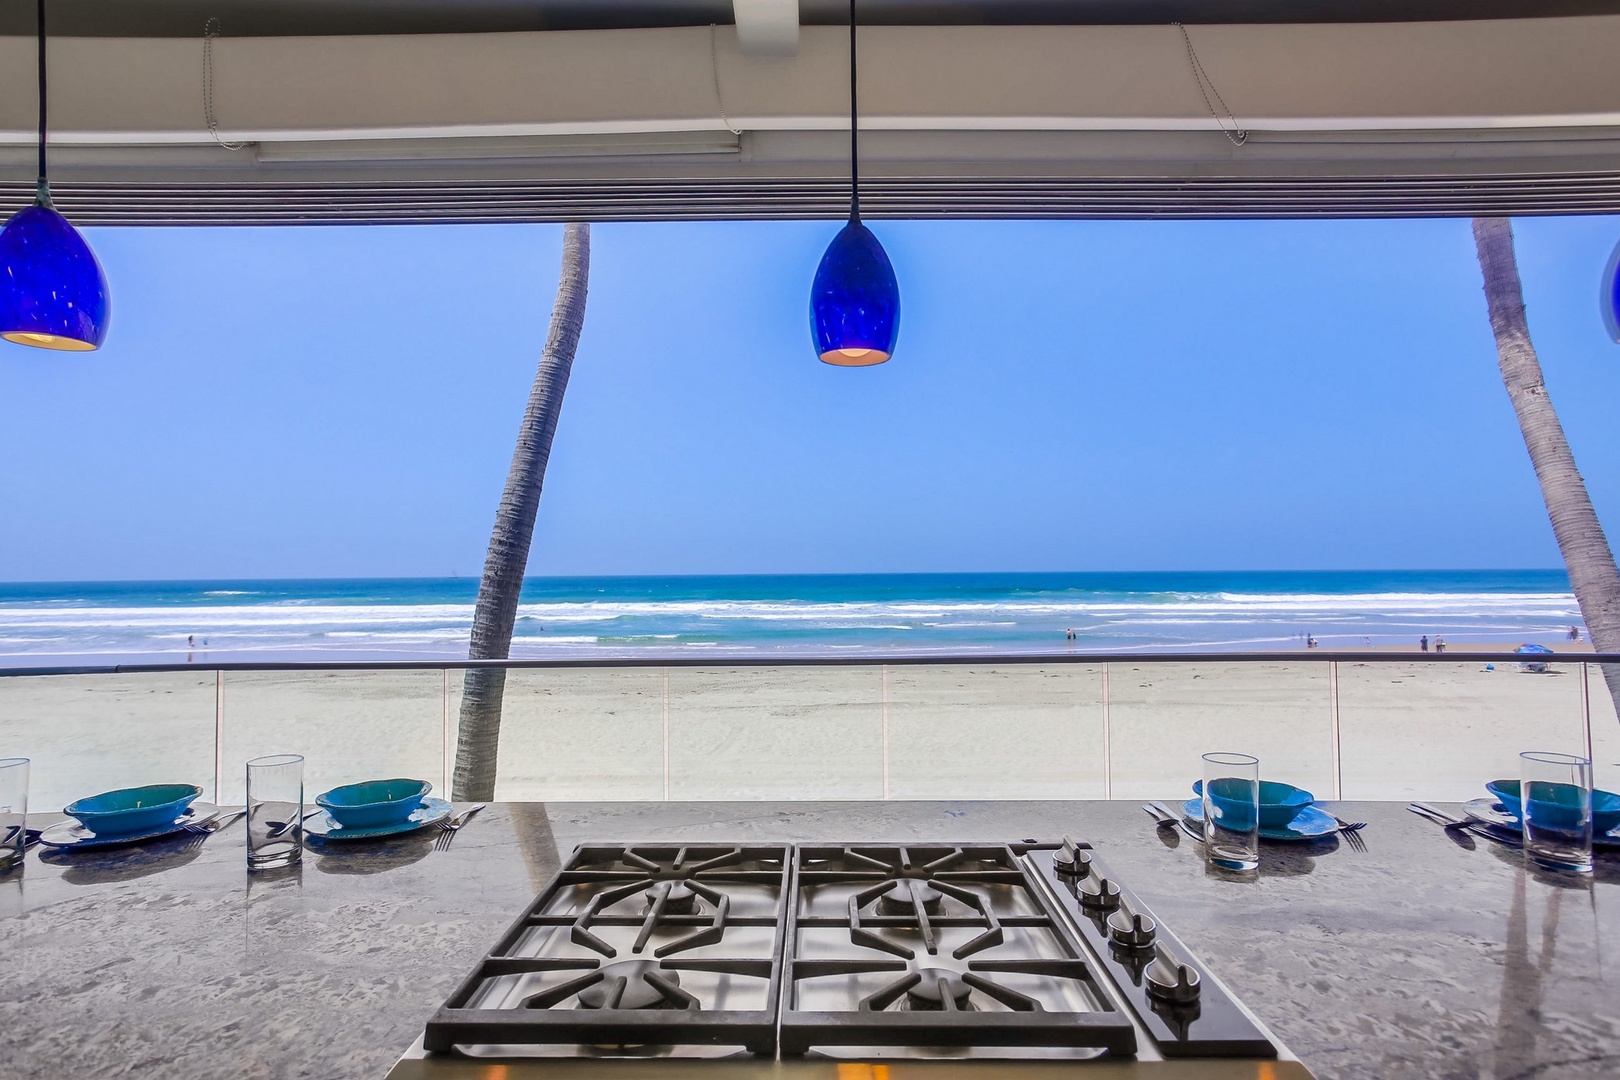 Cooking isn't a chore with this view